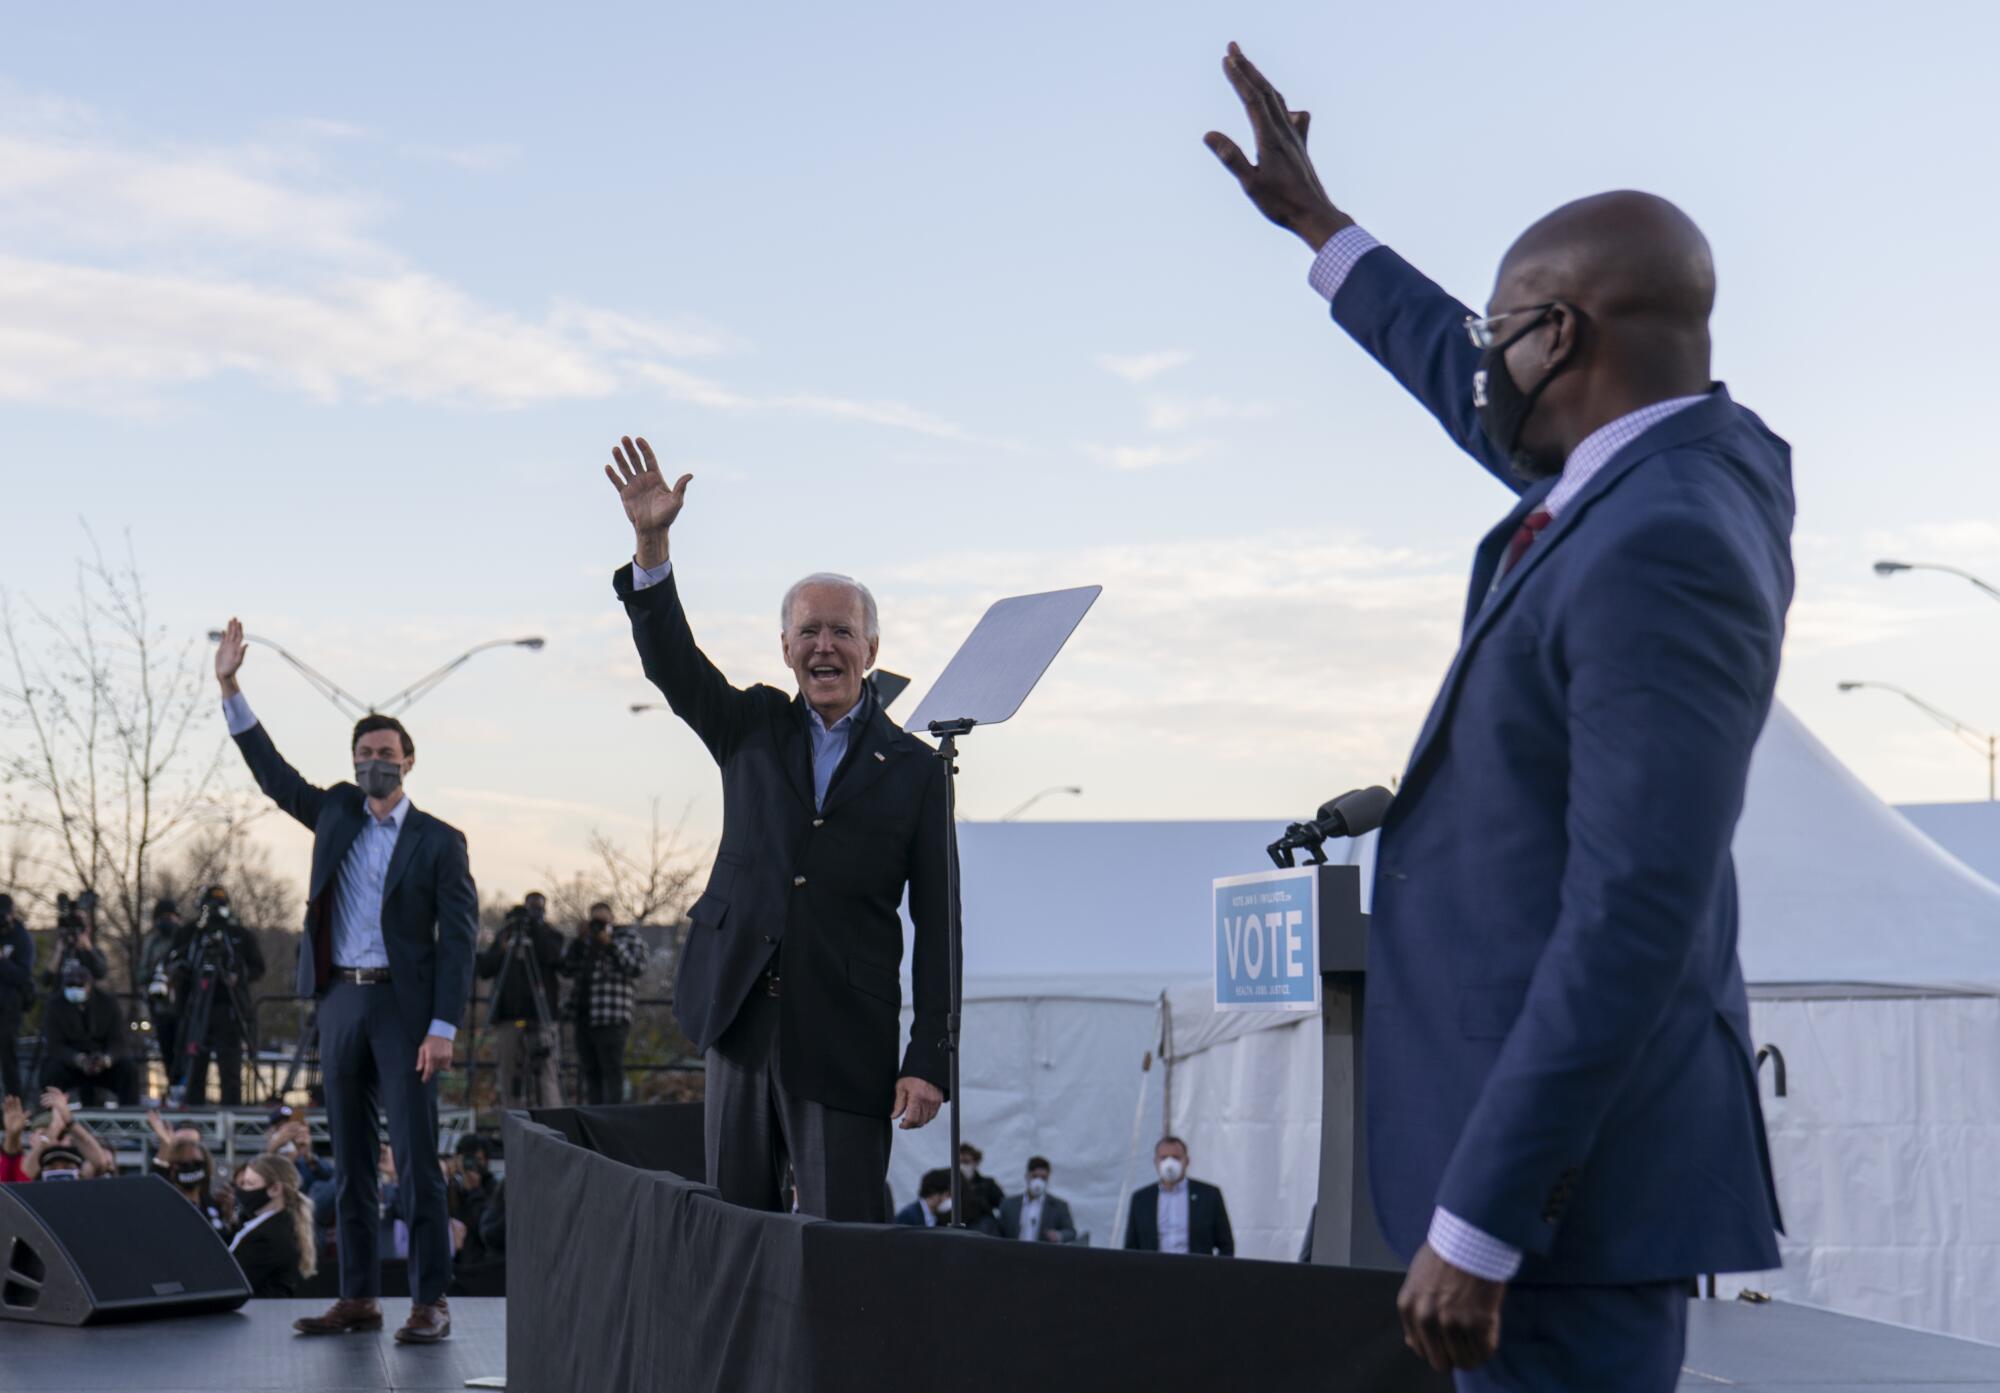 From left, Jon Ossoff, Joe Biden and Raphael Warnock stand on a stage and wave 